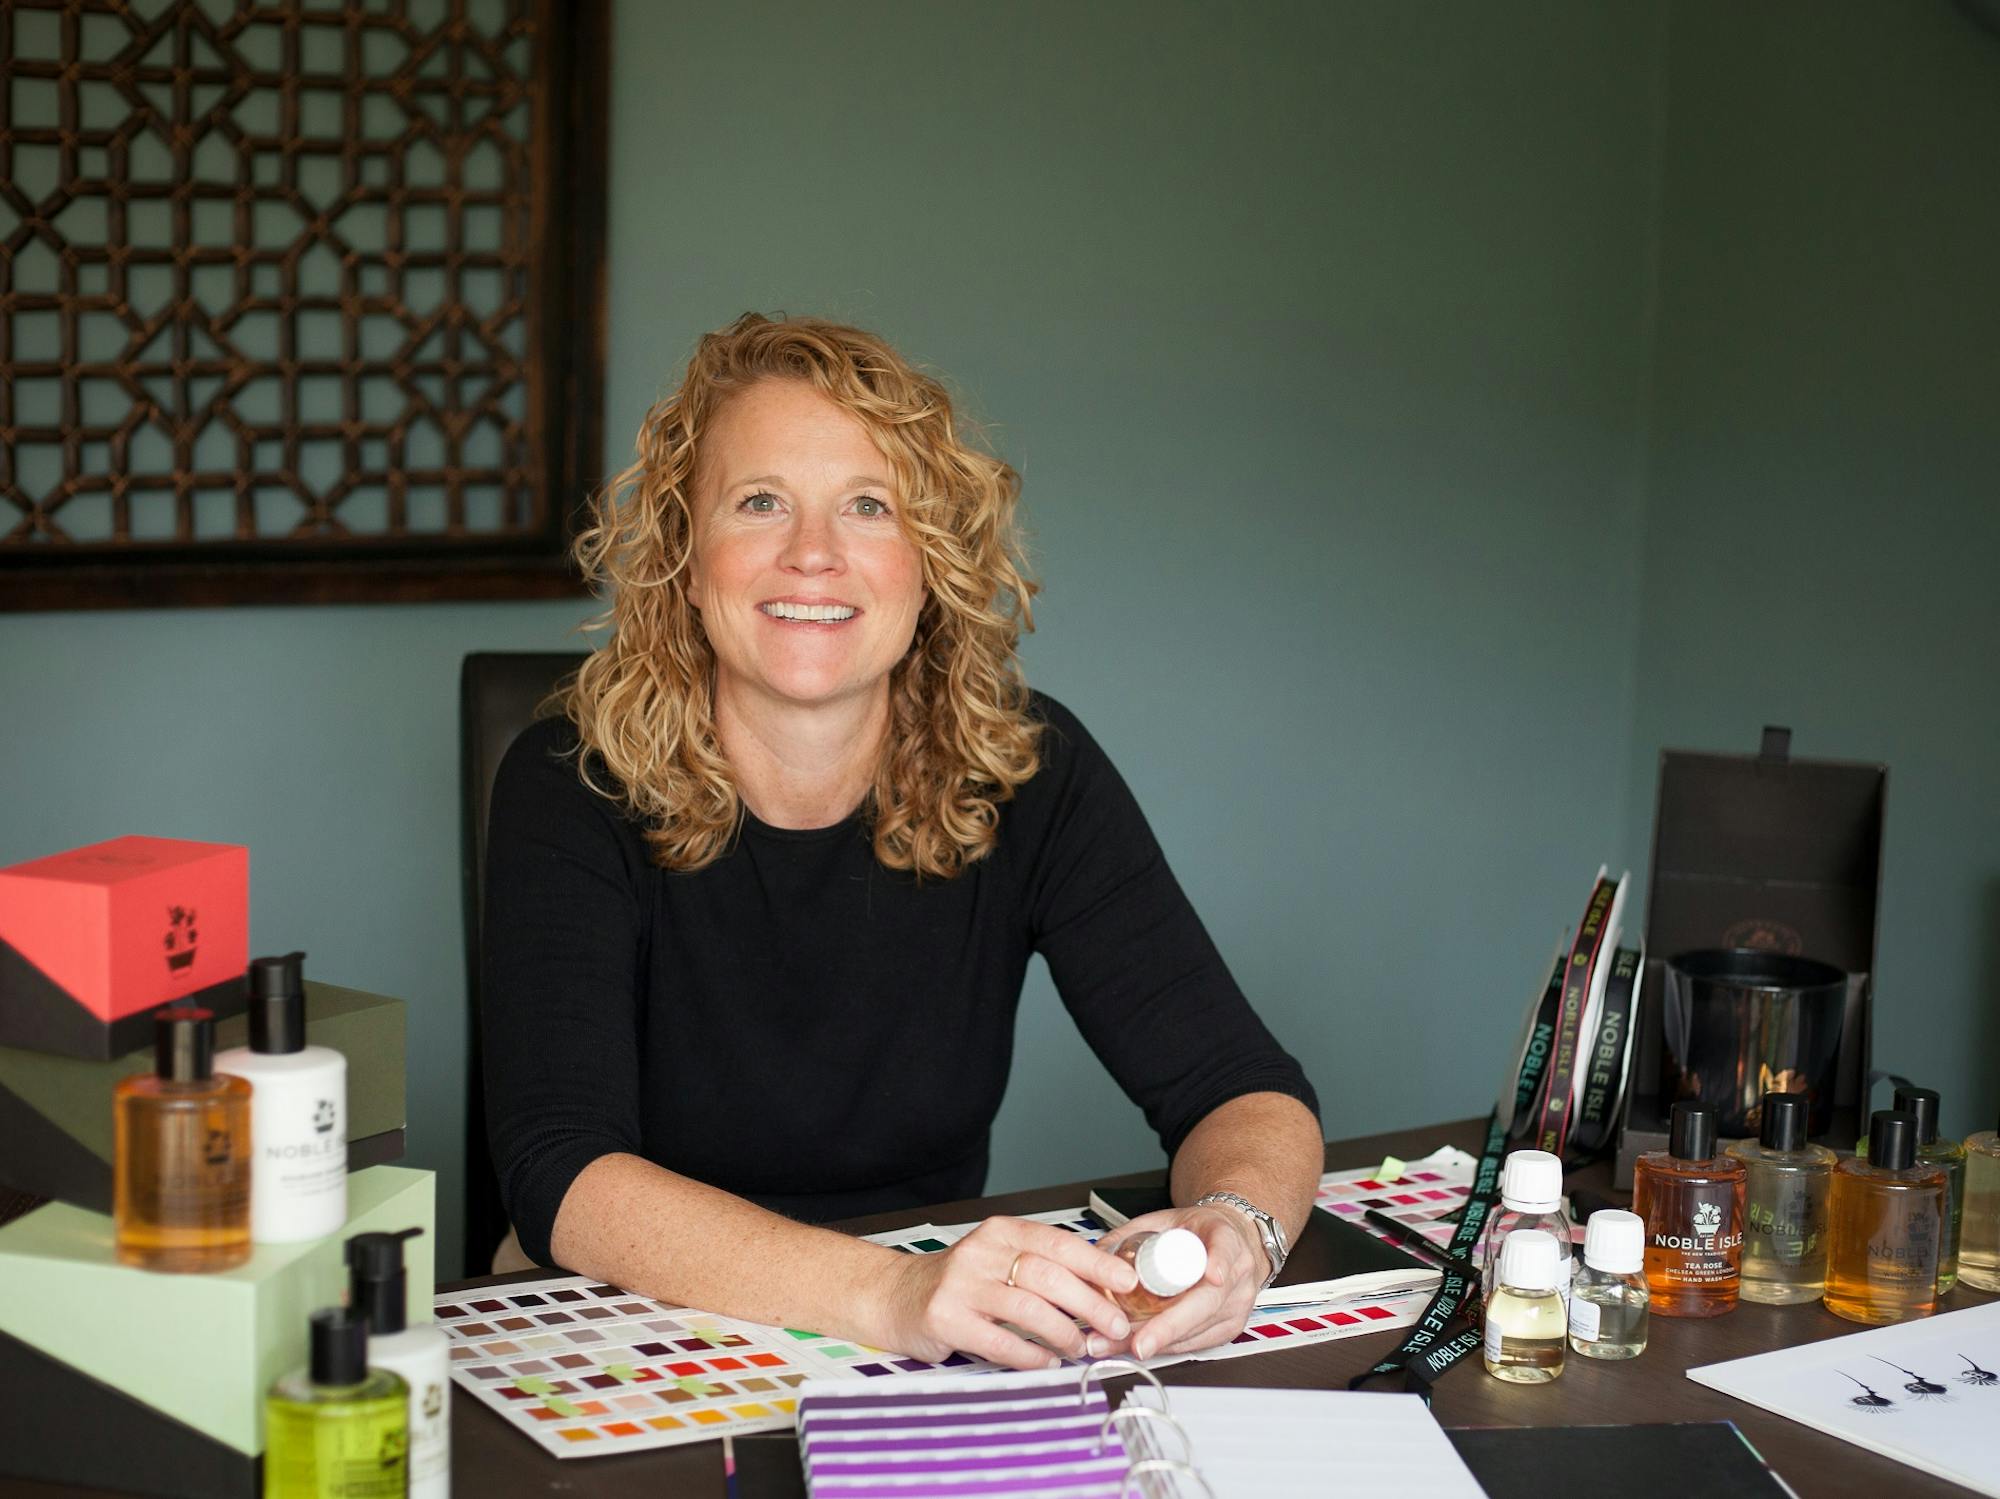 Luxury Leader  Katy Simpson, Founder and CEO of Noble Isle 